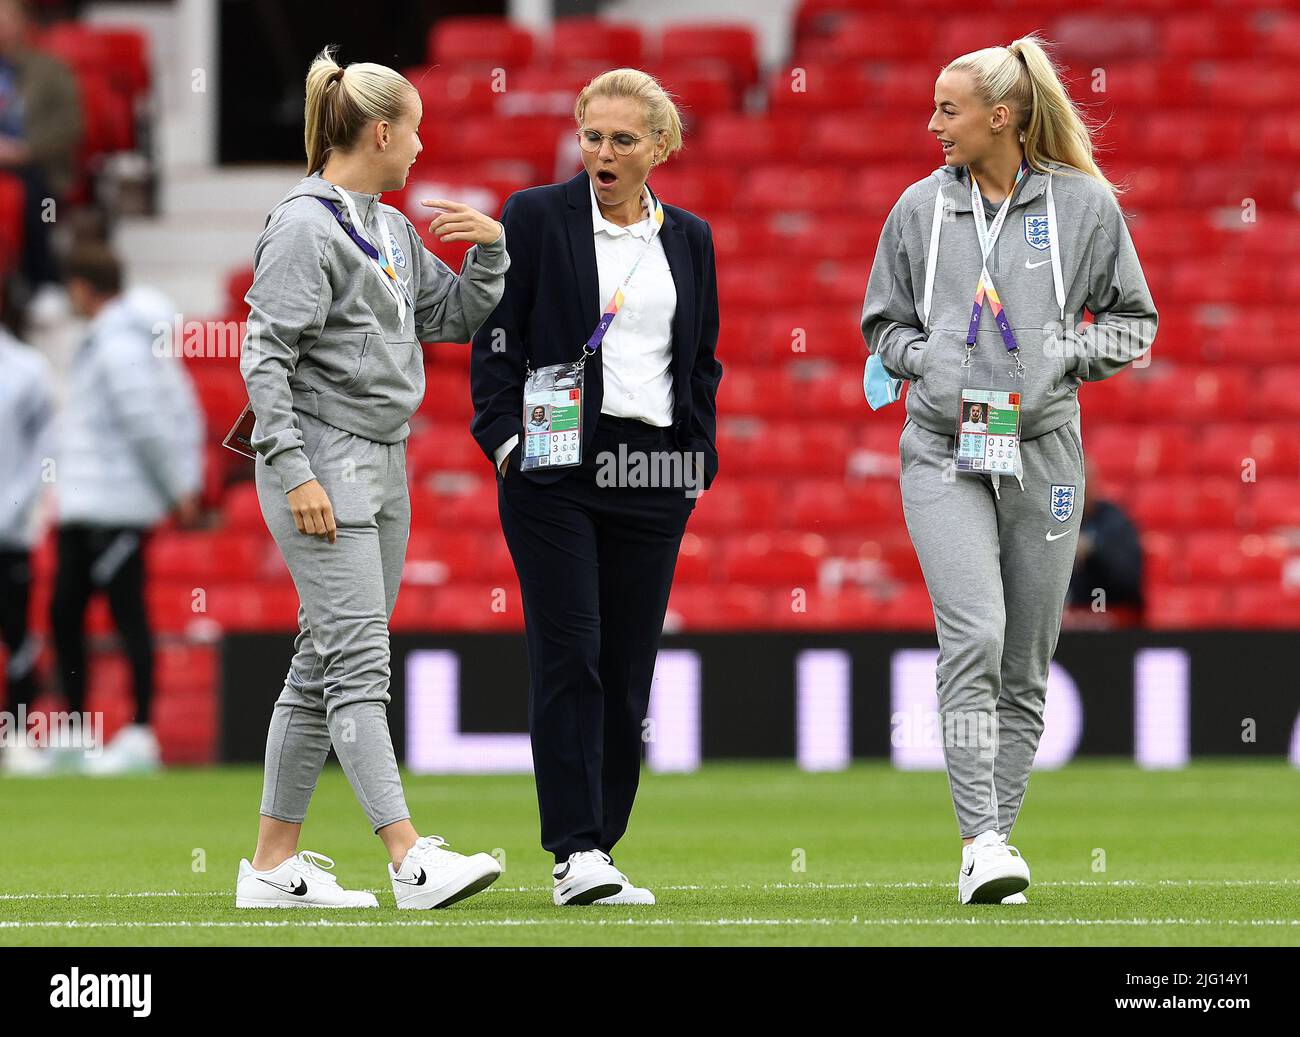 Manchester, UK. 6th July, 2022. England manager Sarina Wiegman (C) walks on the pitch with players before the UEFA Women's European Championship 2022 match at Old Trafford, Manchester. Picture credit should read: Darren Staples/Sportimage Credit: Sportimage/Alamy Live News Stock Photo